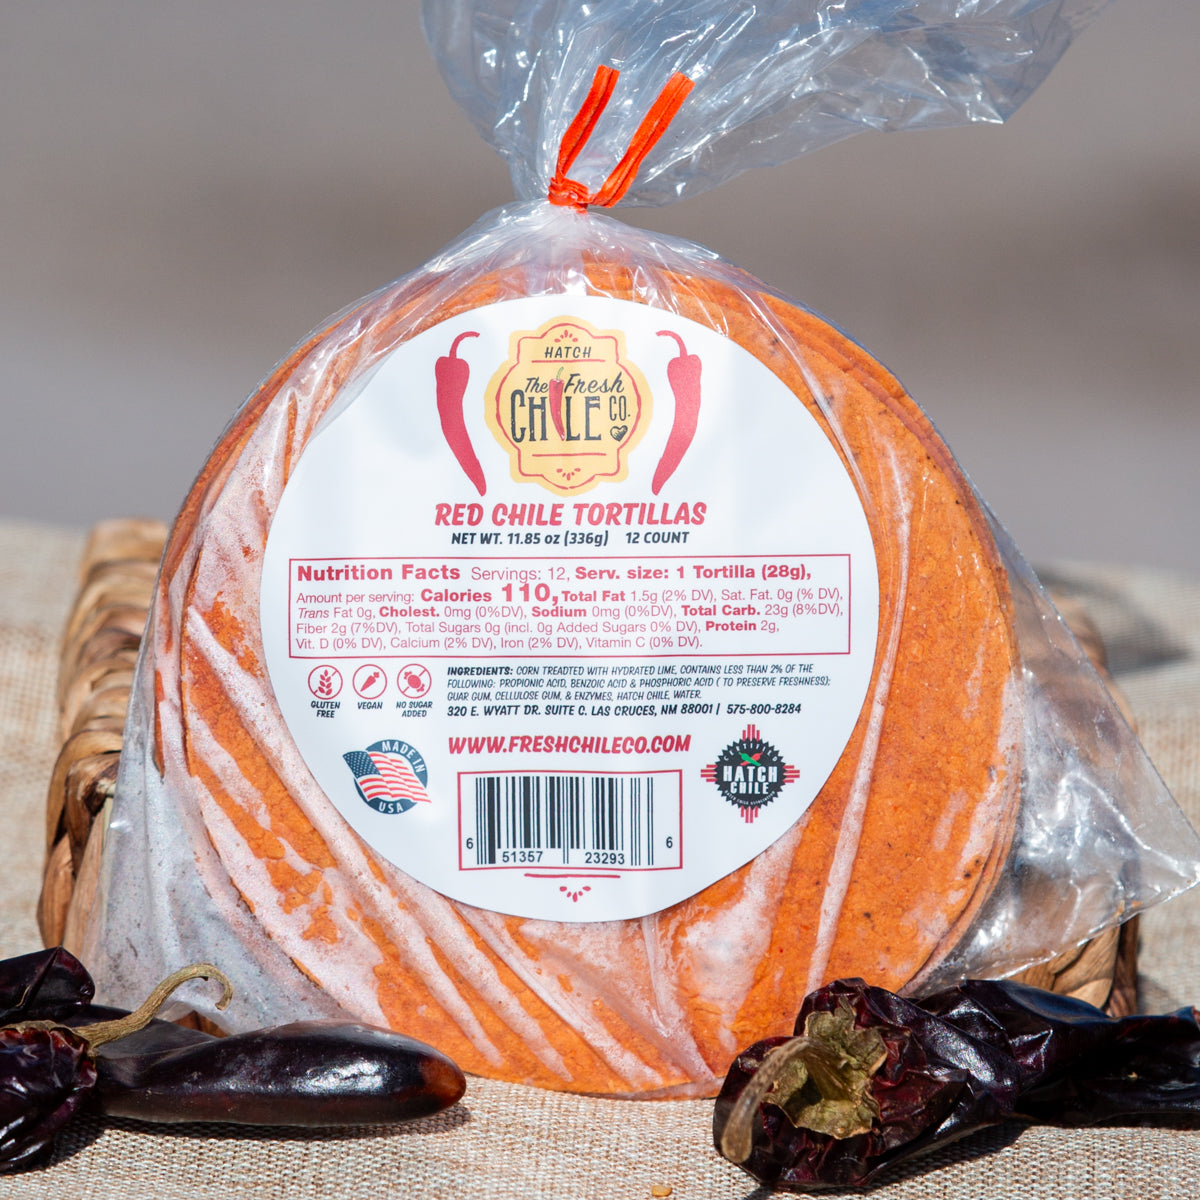 A pack of Red Chile Corn Tortillas in a clear plastic bag with a label, surrounded by dried chile peppers on a neutral textile surface. The label features nutritional info and branding details.